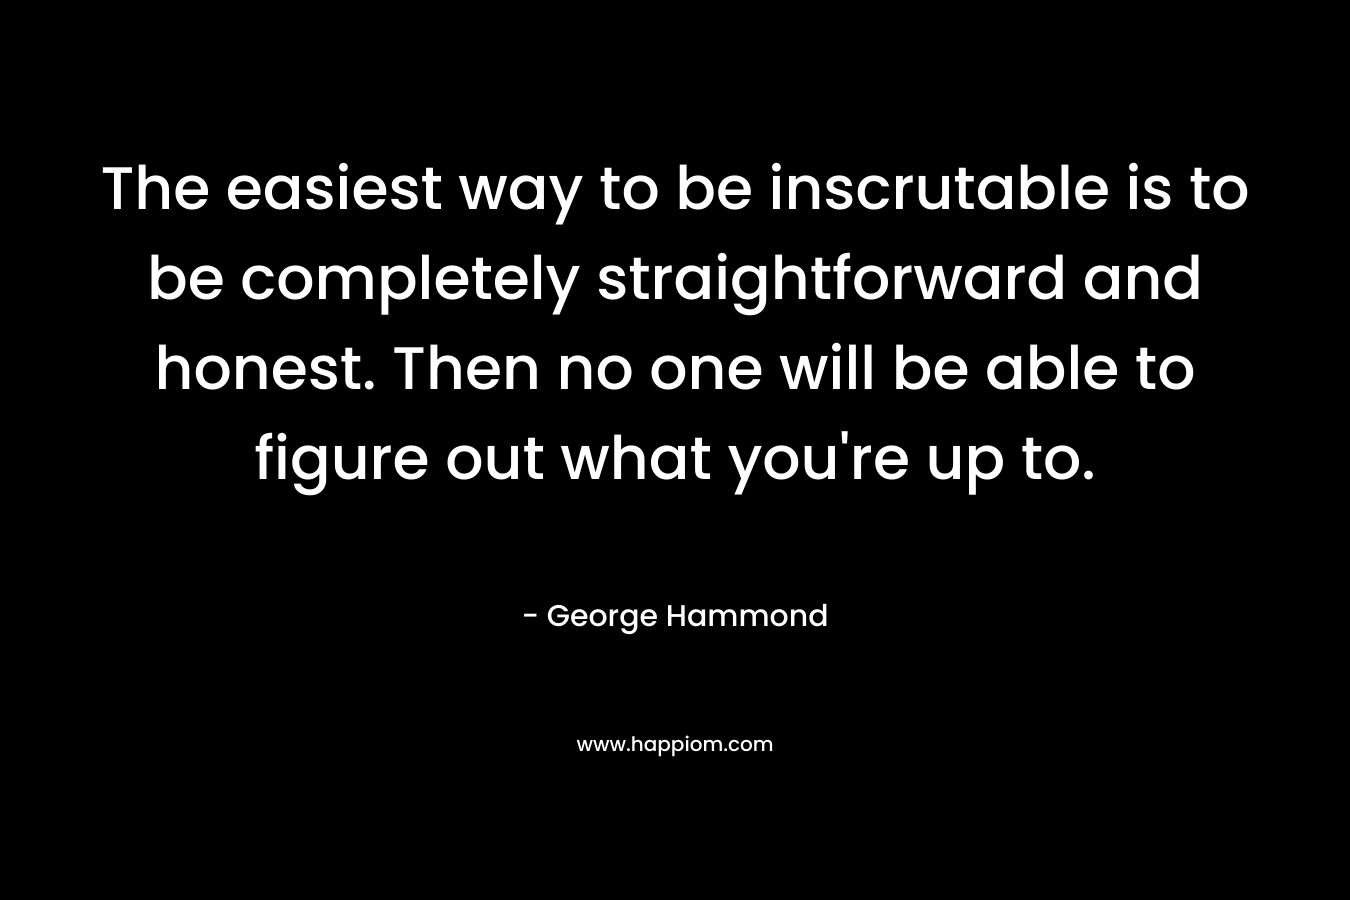 The easiest way to be inscrutable is to be completely straightforward and honest. Then no one will be able to figure out what you're up to.